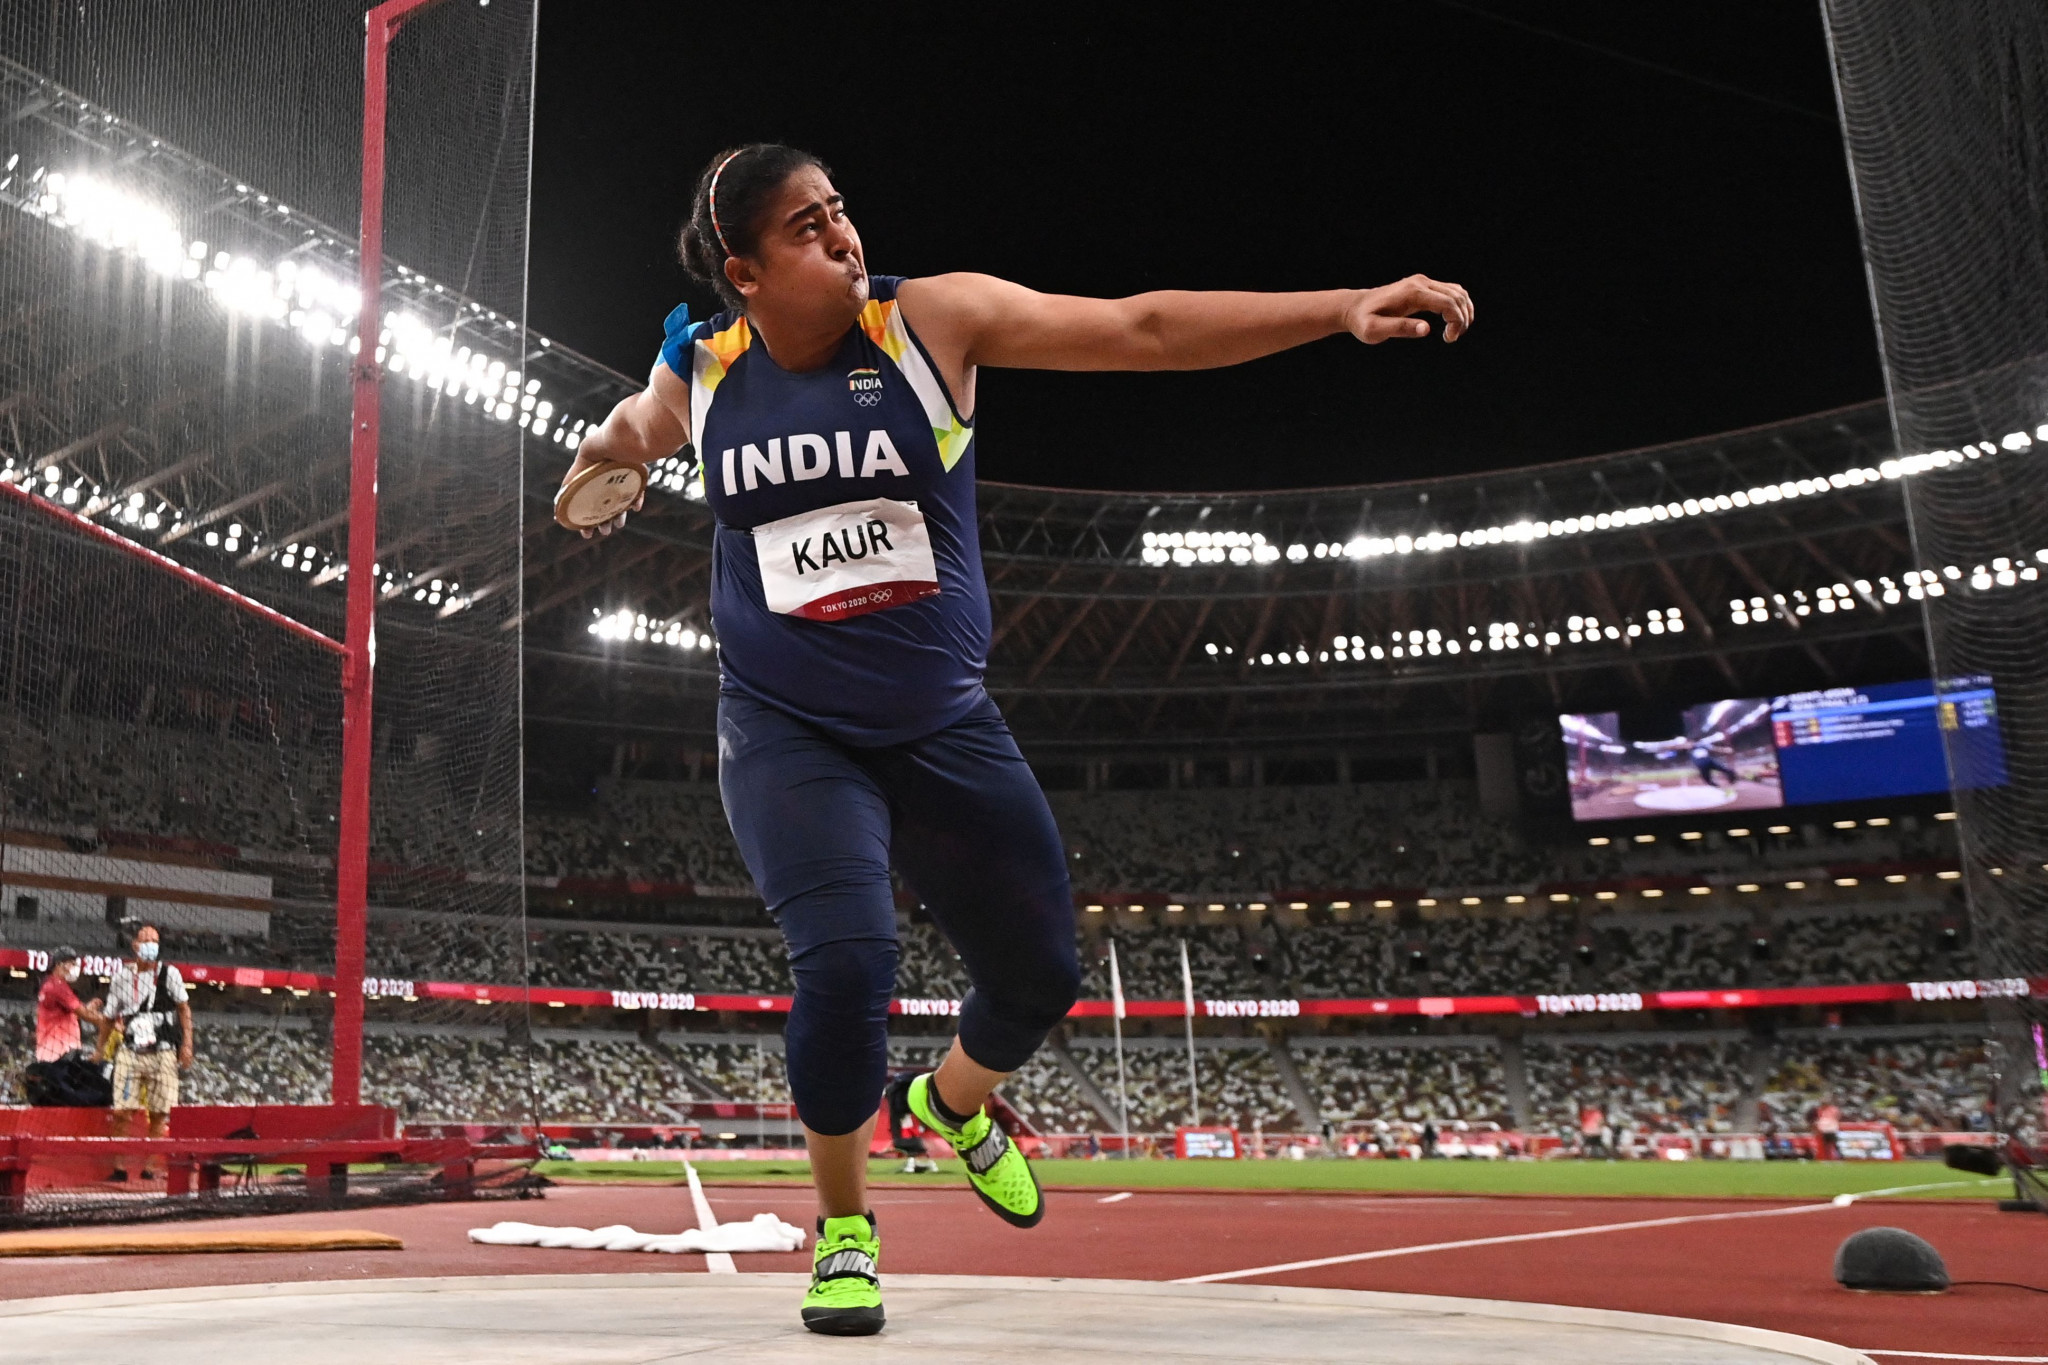 Kamalpreet Kaur is one of the most notable Indian athletes to test positive recently ©Getty Images